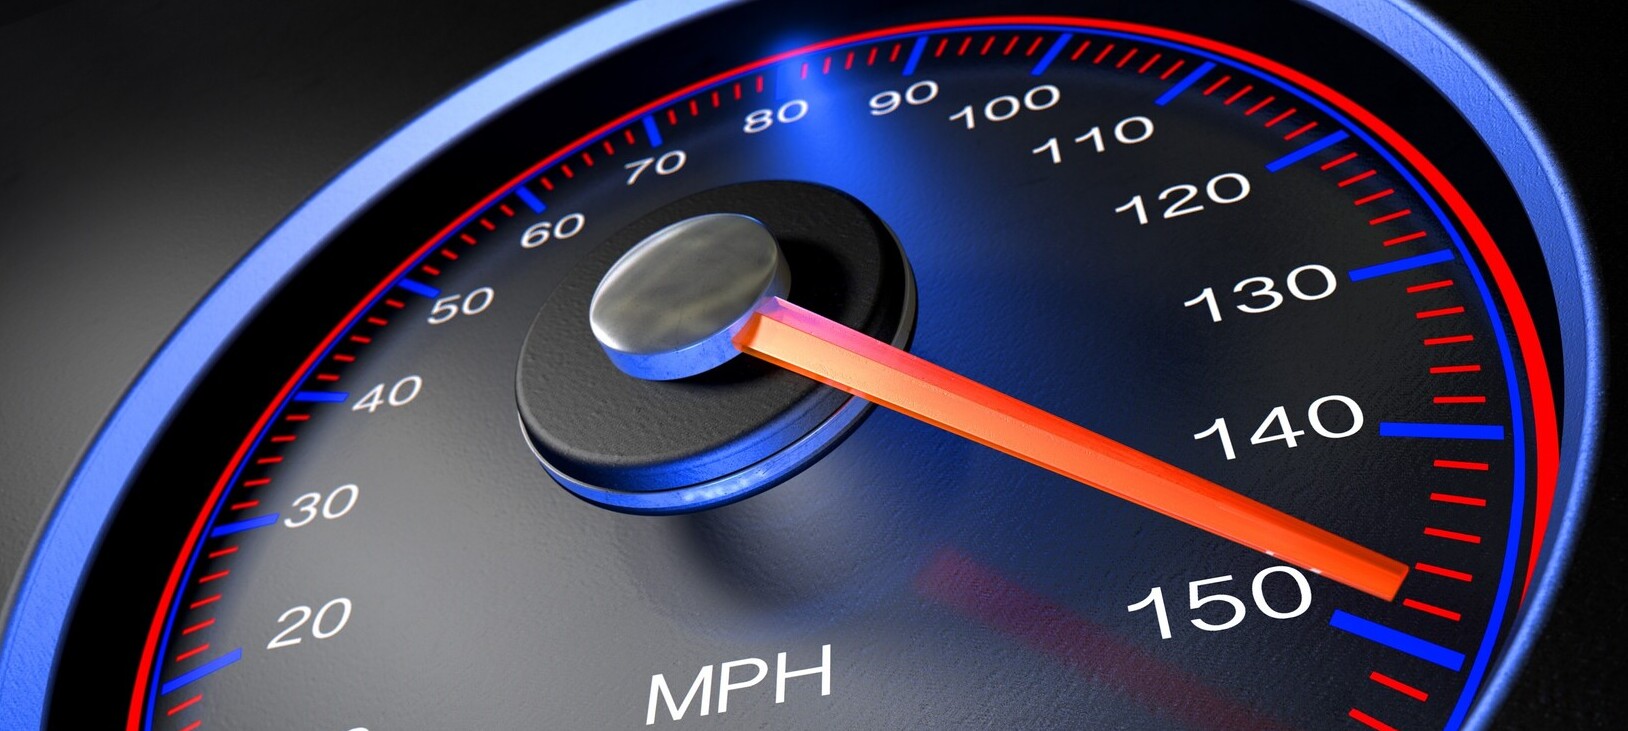 Black, blue, and orange speedometer with needle pinned at 150 mph